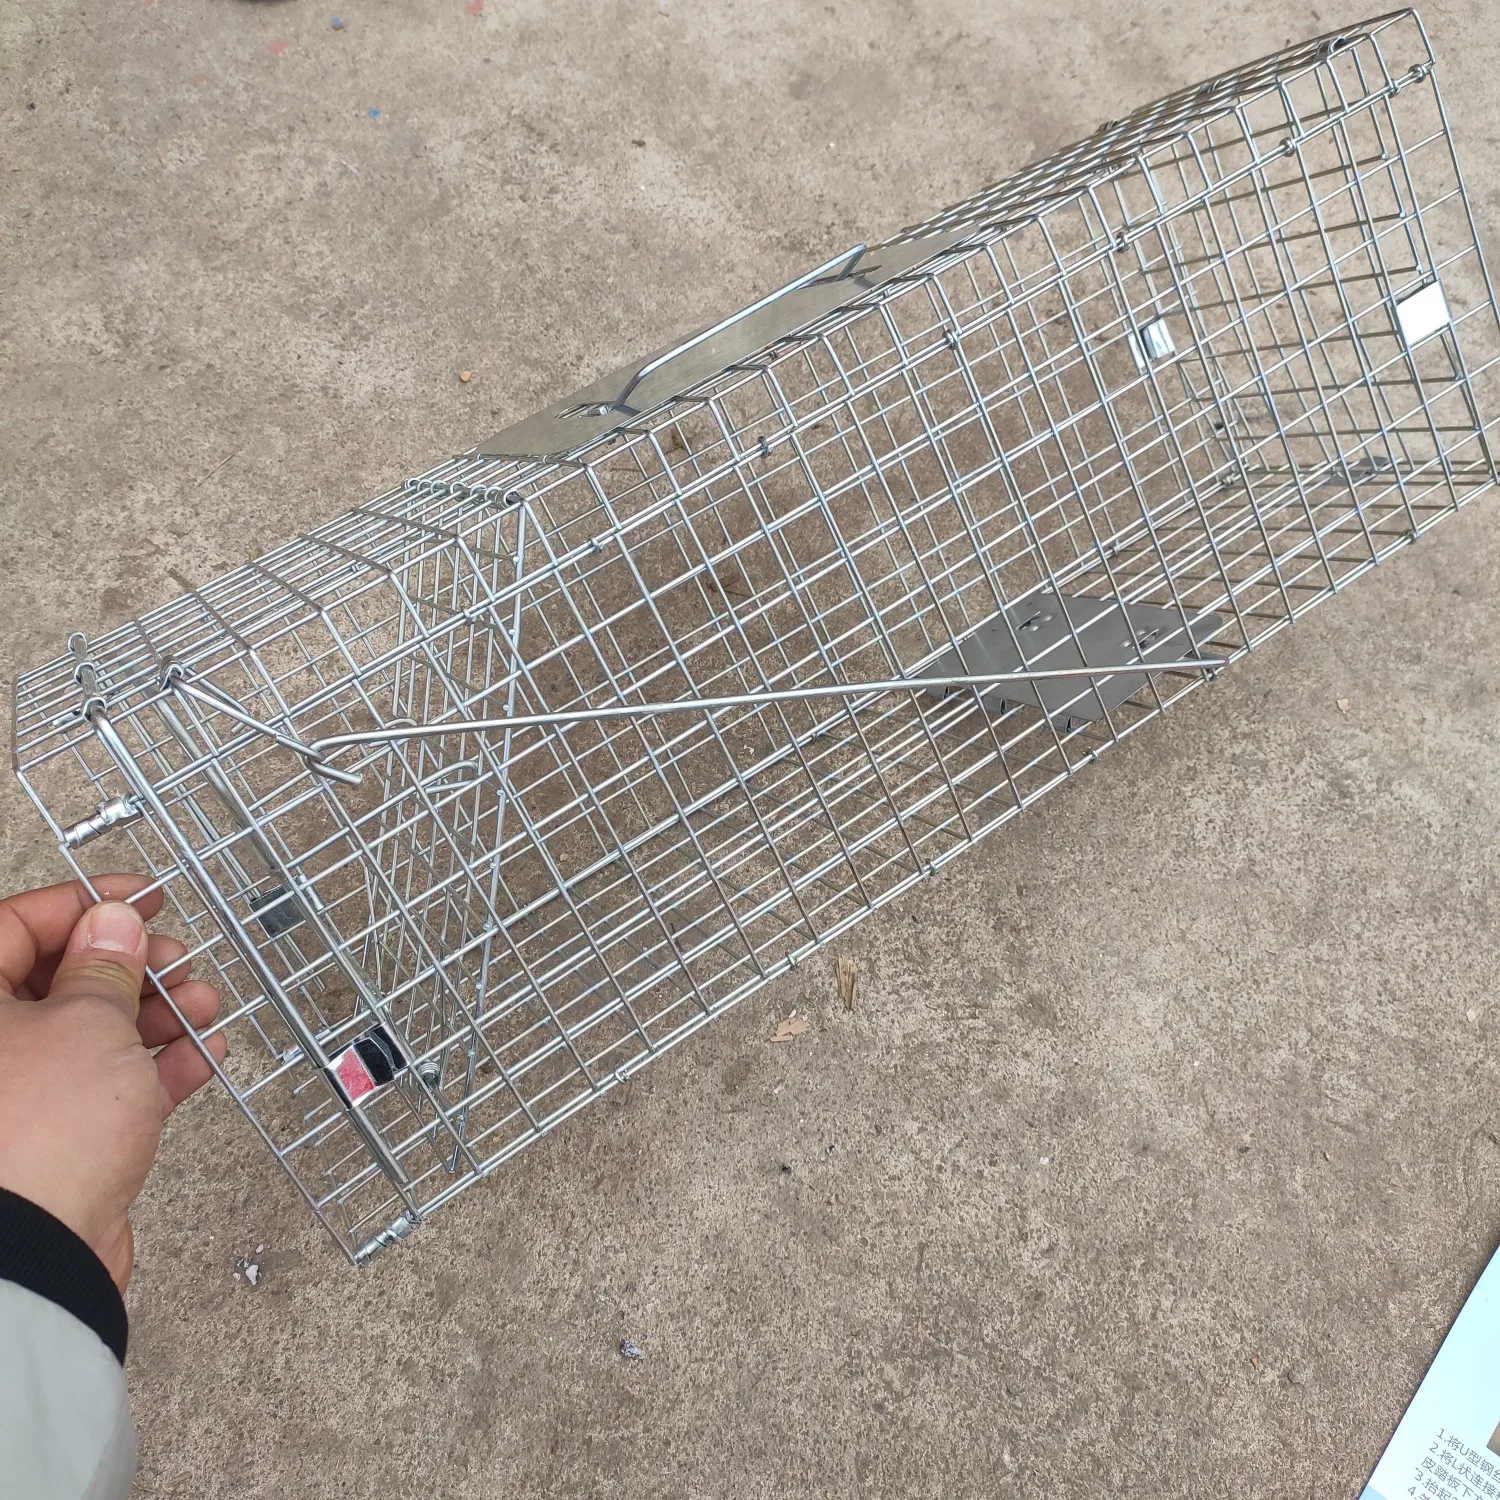  LifeSupplyUSA Humane Live Animal Trap - Catch and Release  1-Door Cage Trap for Dogs, Foxes, Badgers, Coyotes, Similar Sized Animals -  No Kill Easy Trapping (42x15x15) : Patio, Lawn 